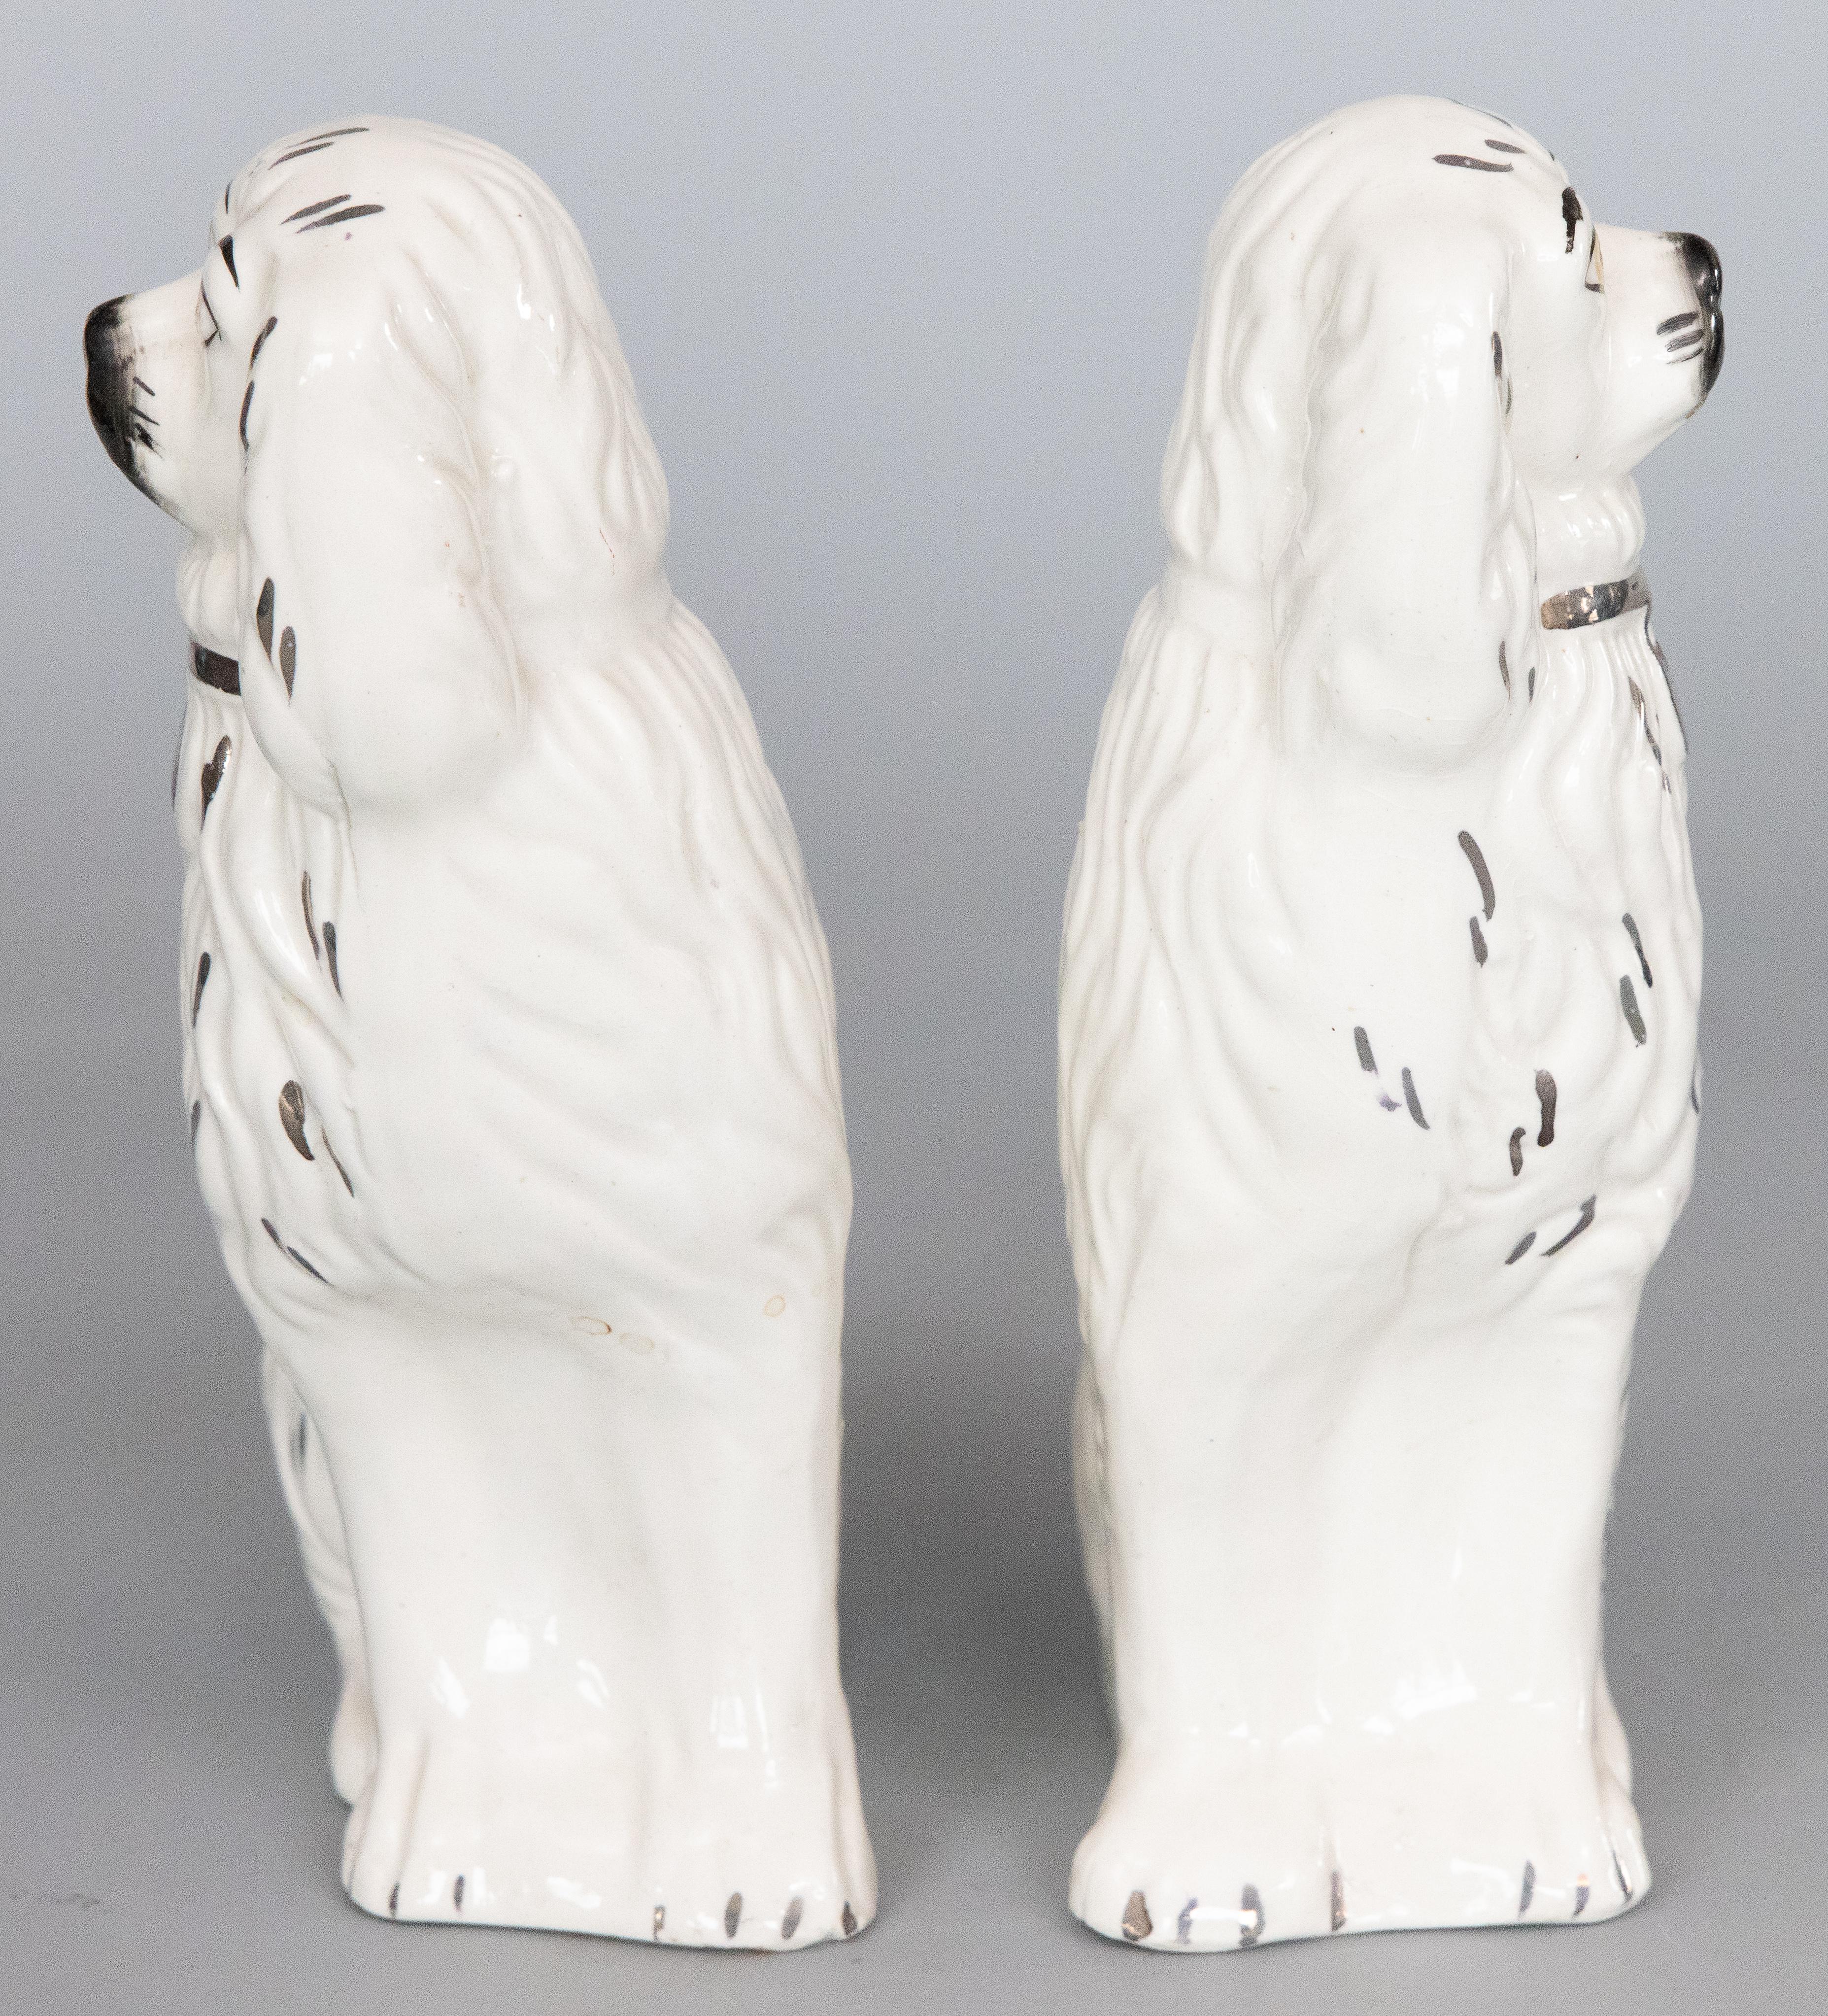 Par of Antique Early 20th Century English Staffordshire Spaniel Dogs Figurines In Good Condition For Sale In Pearland, TX